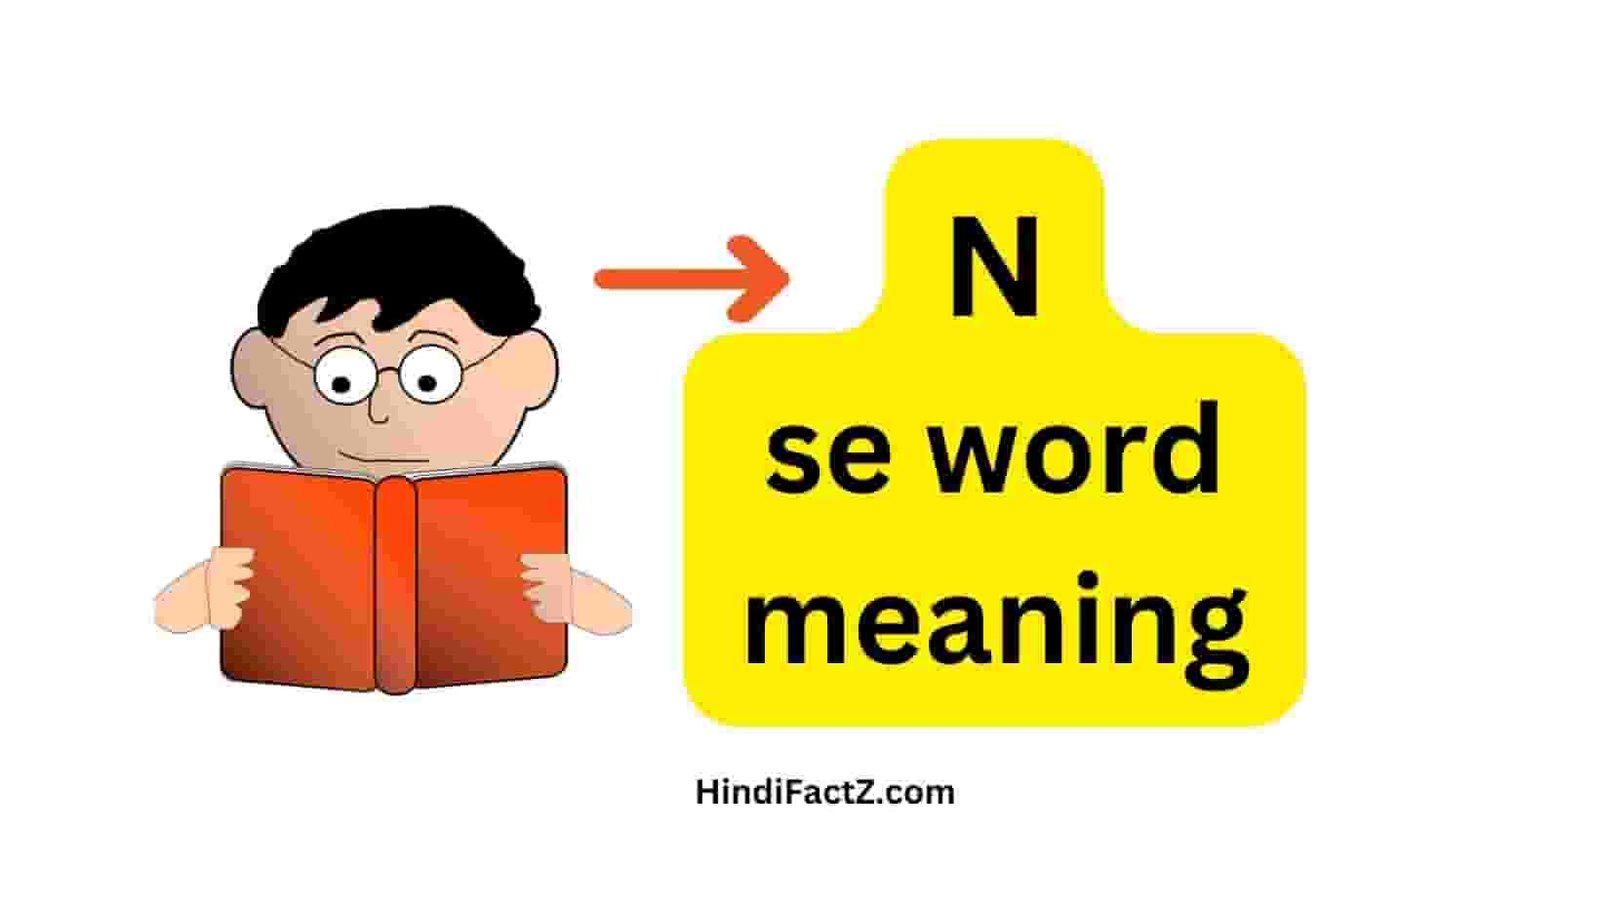 N se word meaning